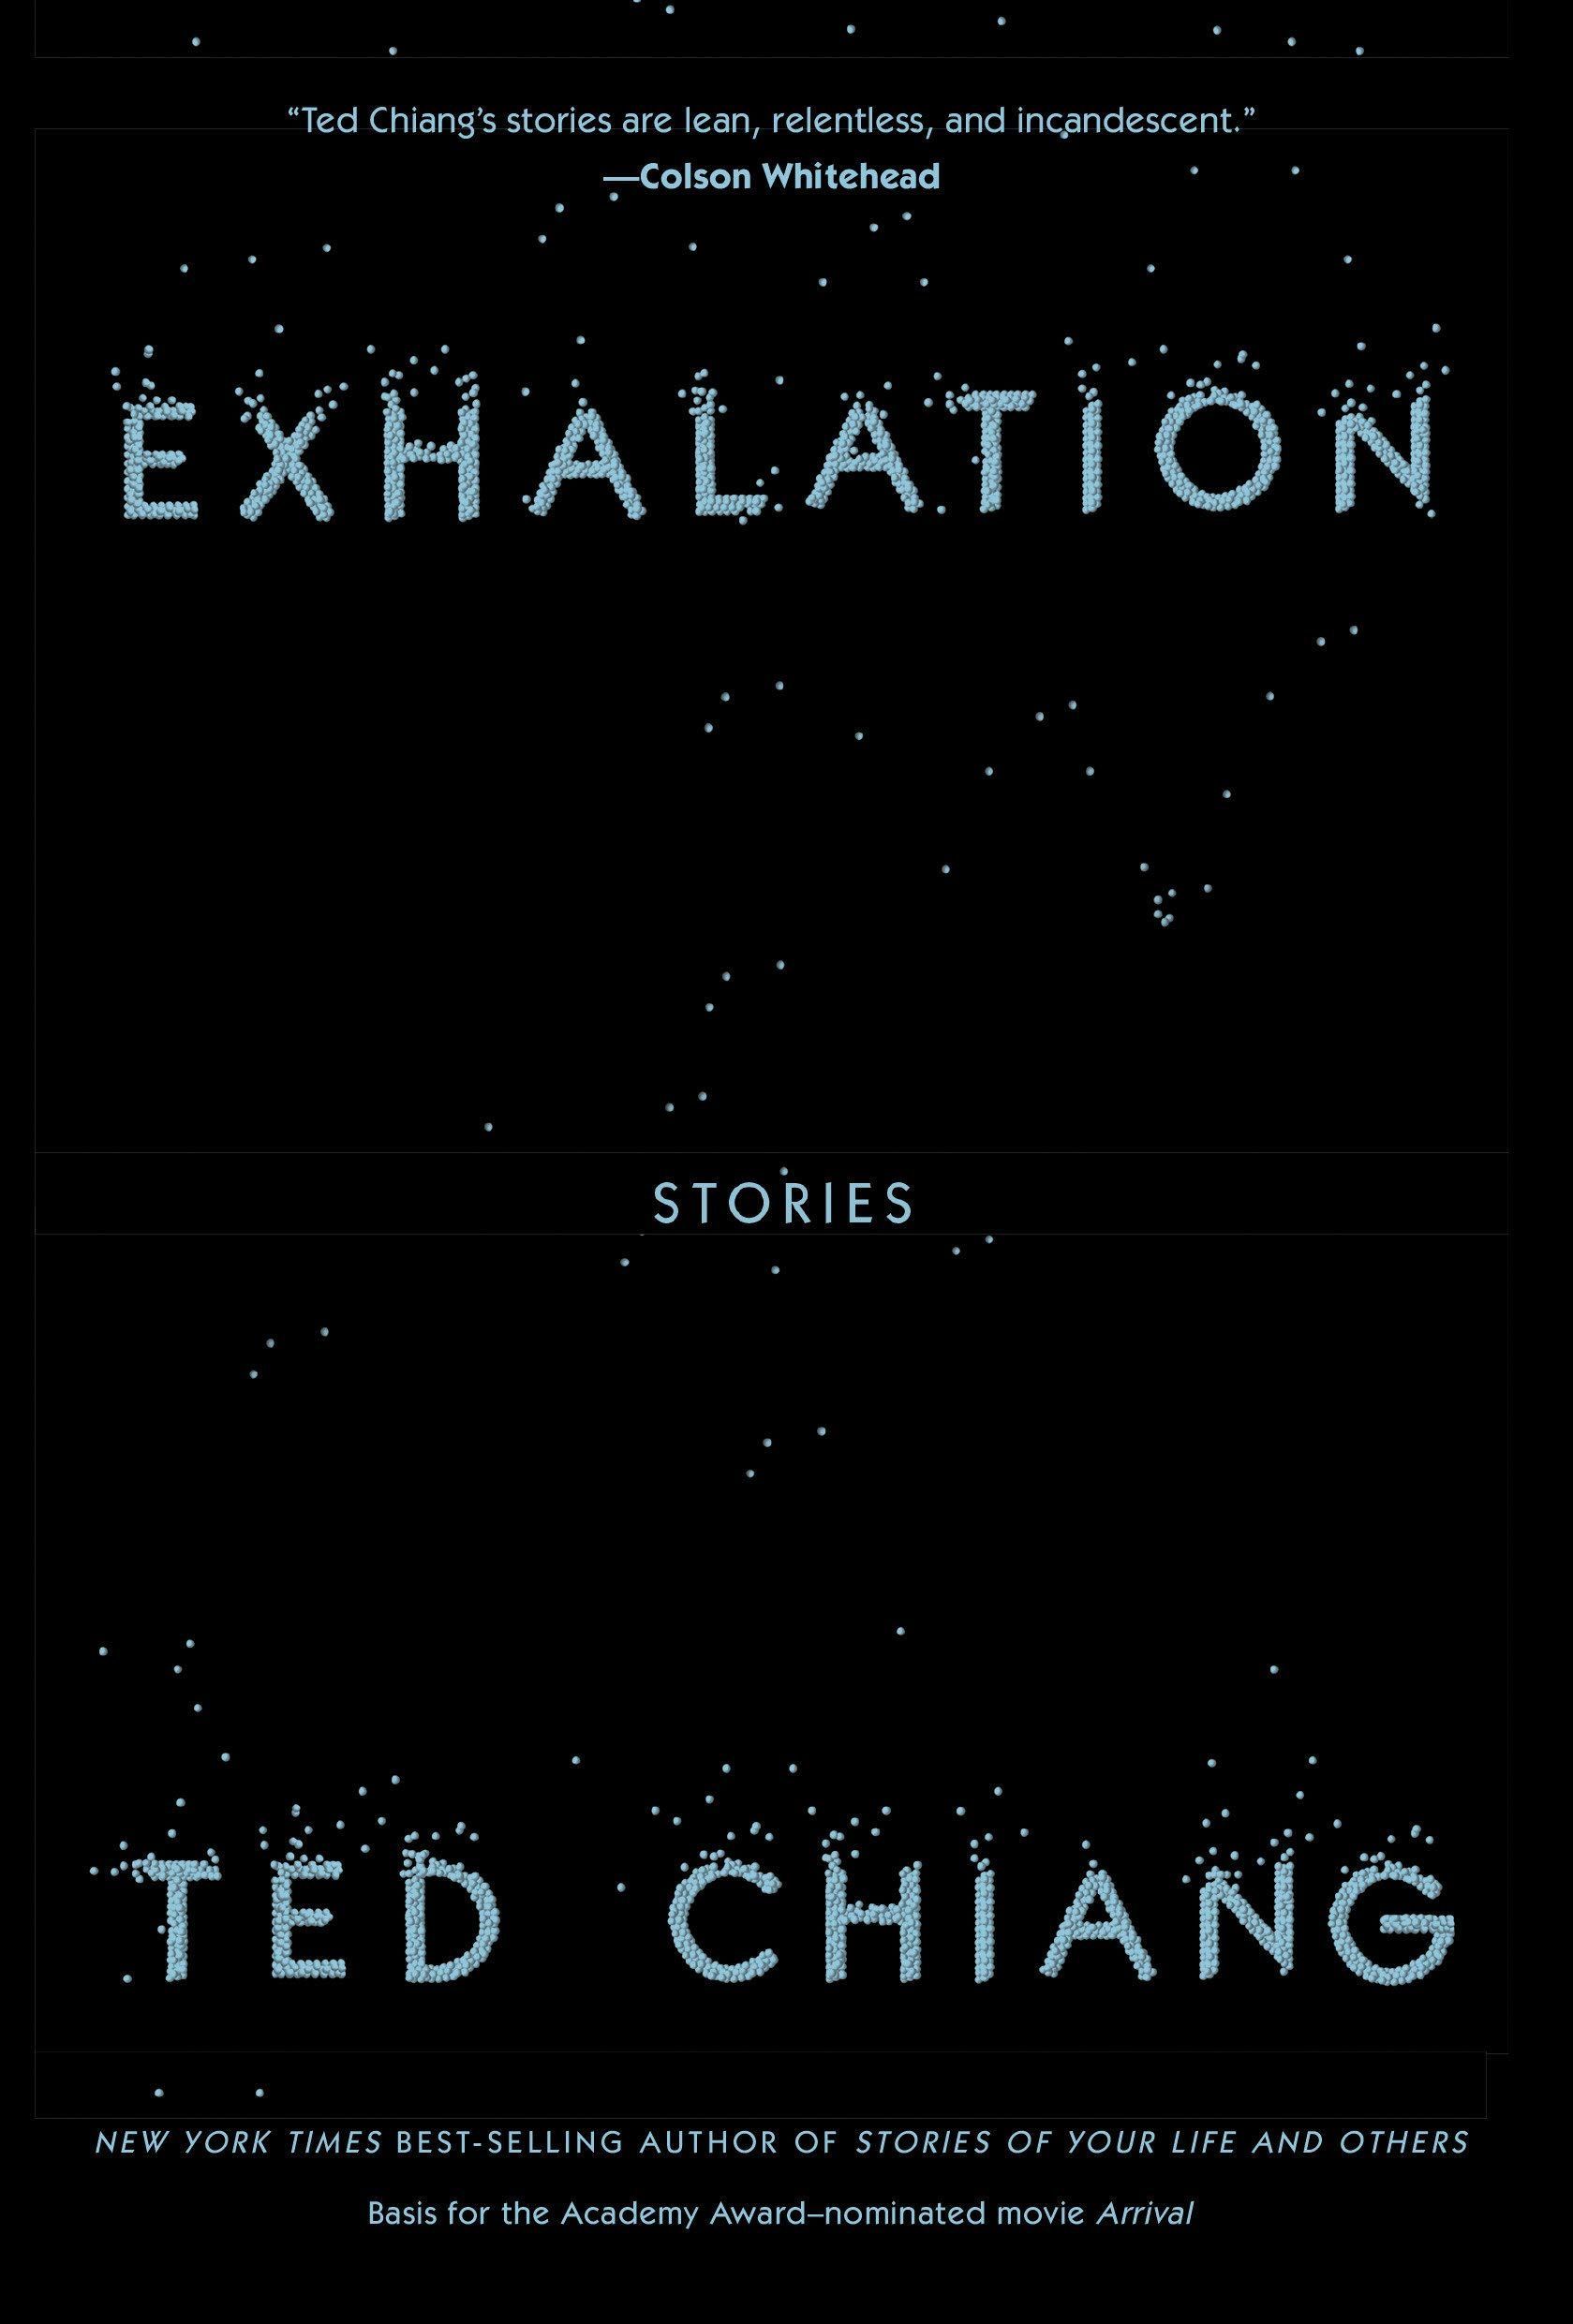 The Technologies That Remake Us: On Ted Chiang’s “Exhalation: Stories”